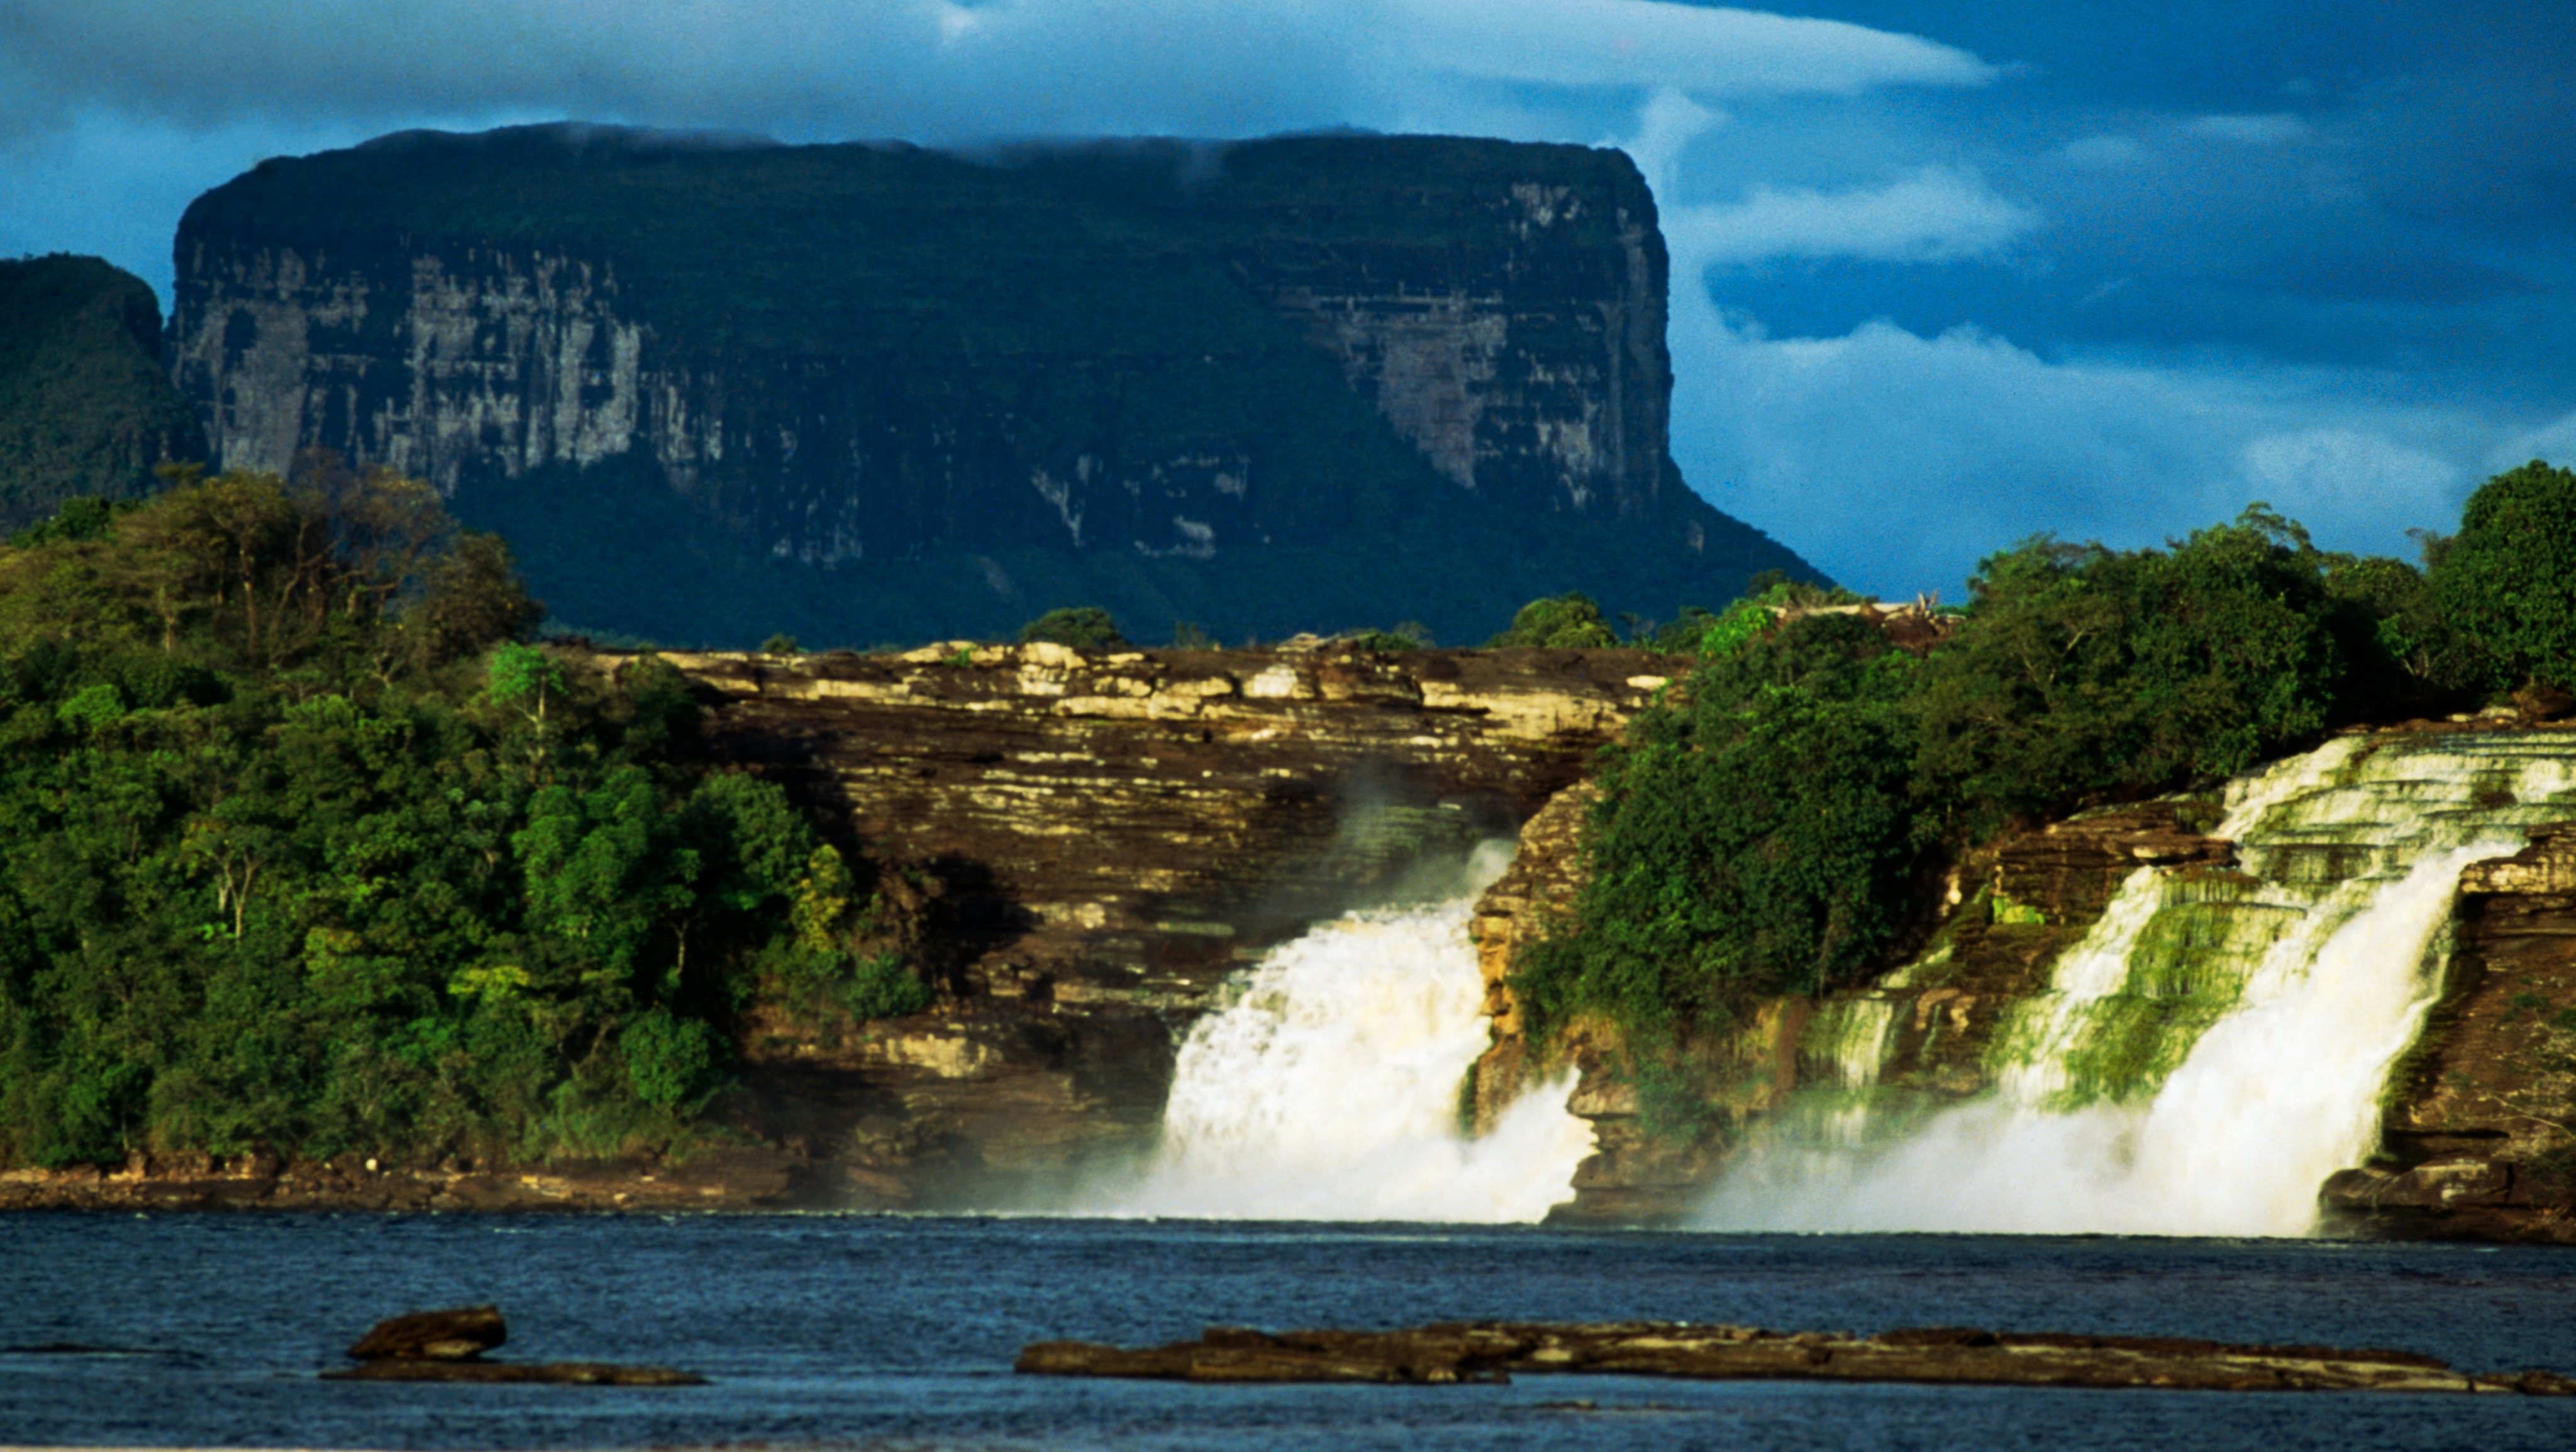 The Hacha Falls in Canaima National Park